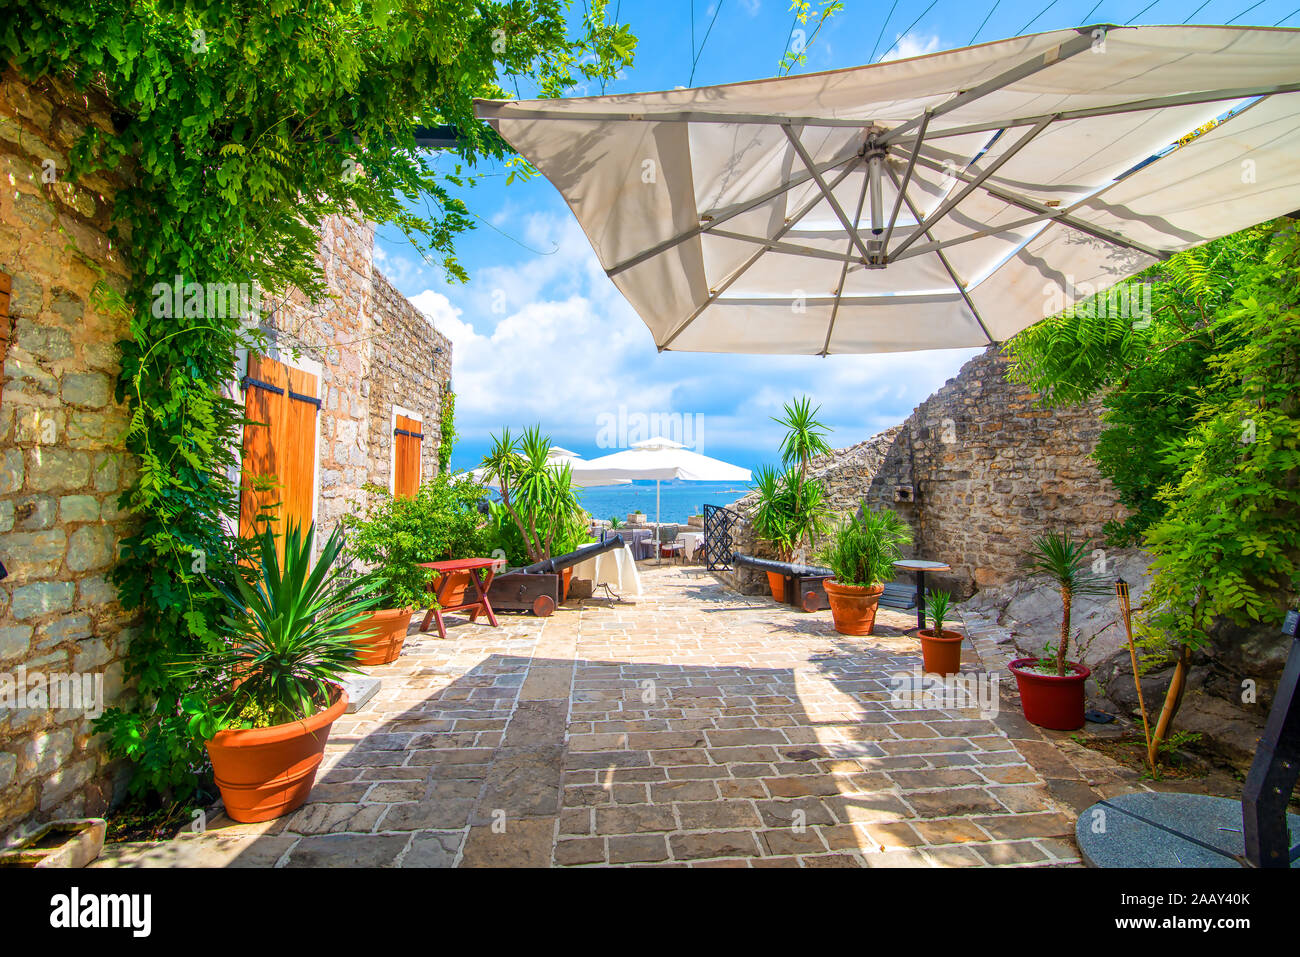 Courtyard in the old town of Budva, Montenegro Stock Photo